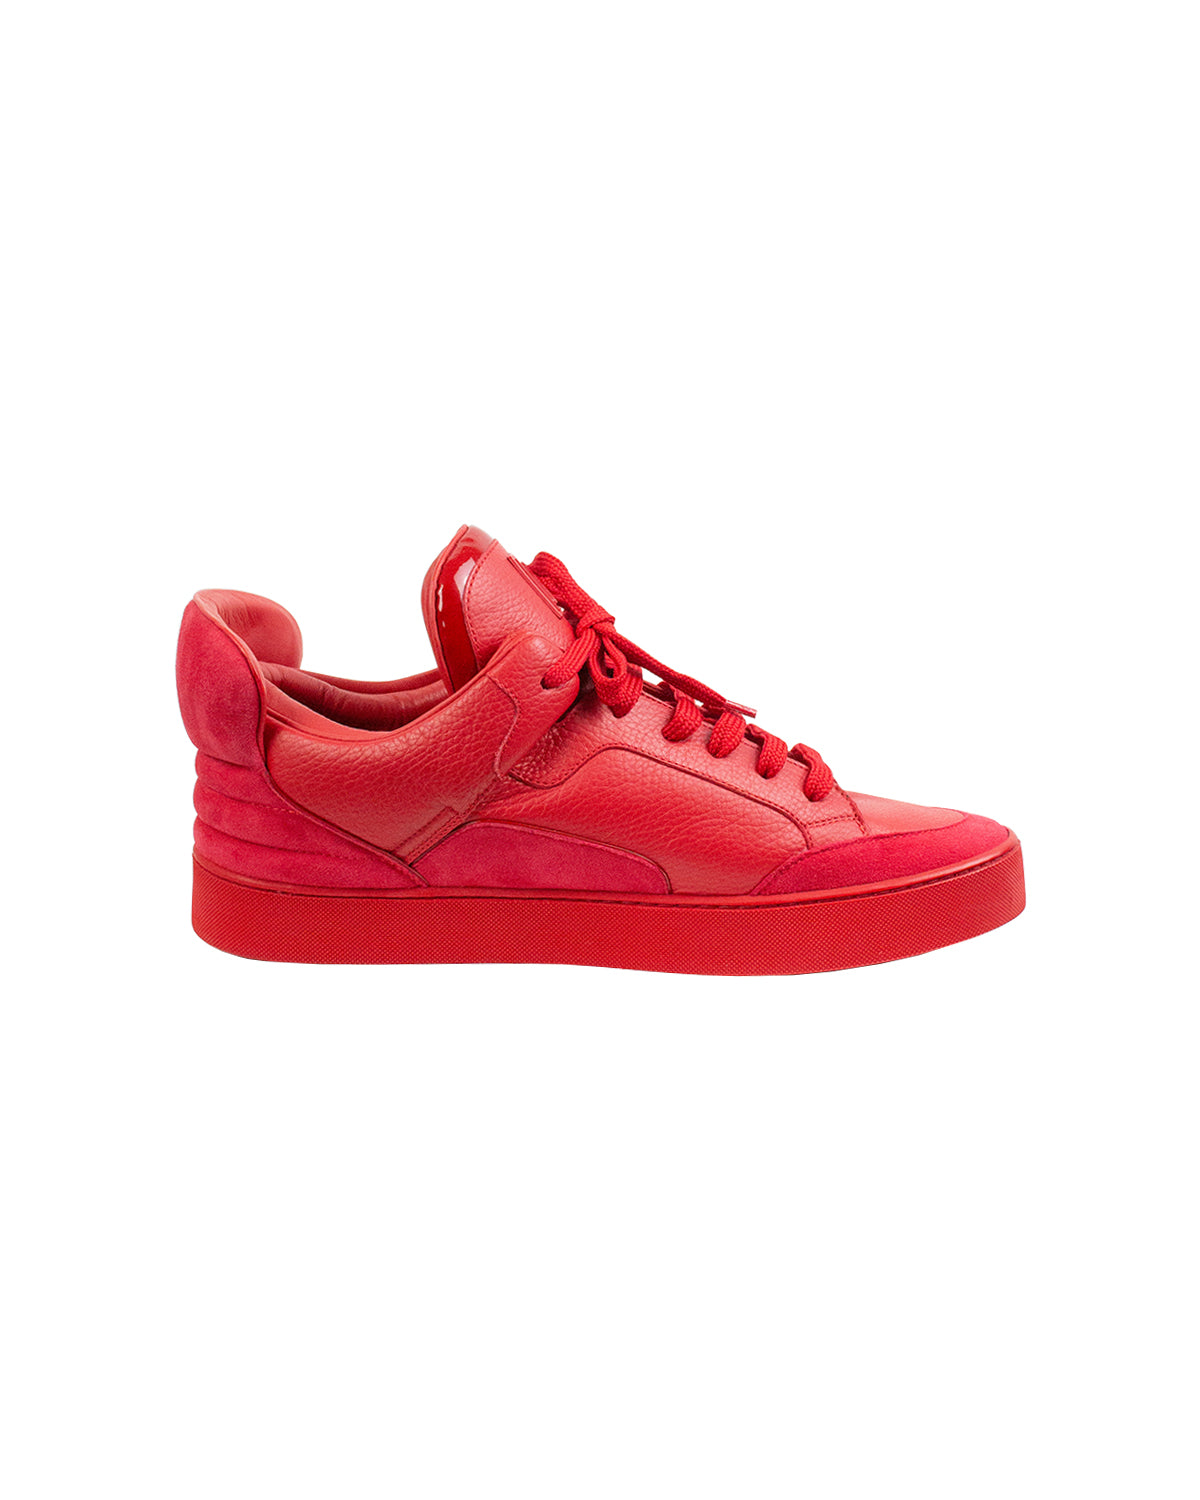 100% AUTHENTIC LOUIS VUITTON DON X KANYE WEST RED LV 7 US 8.5